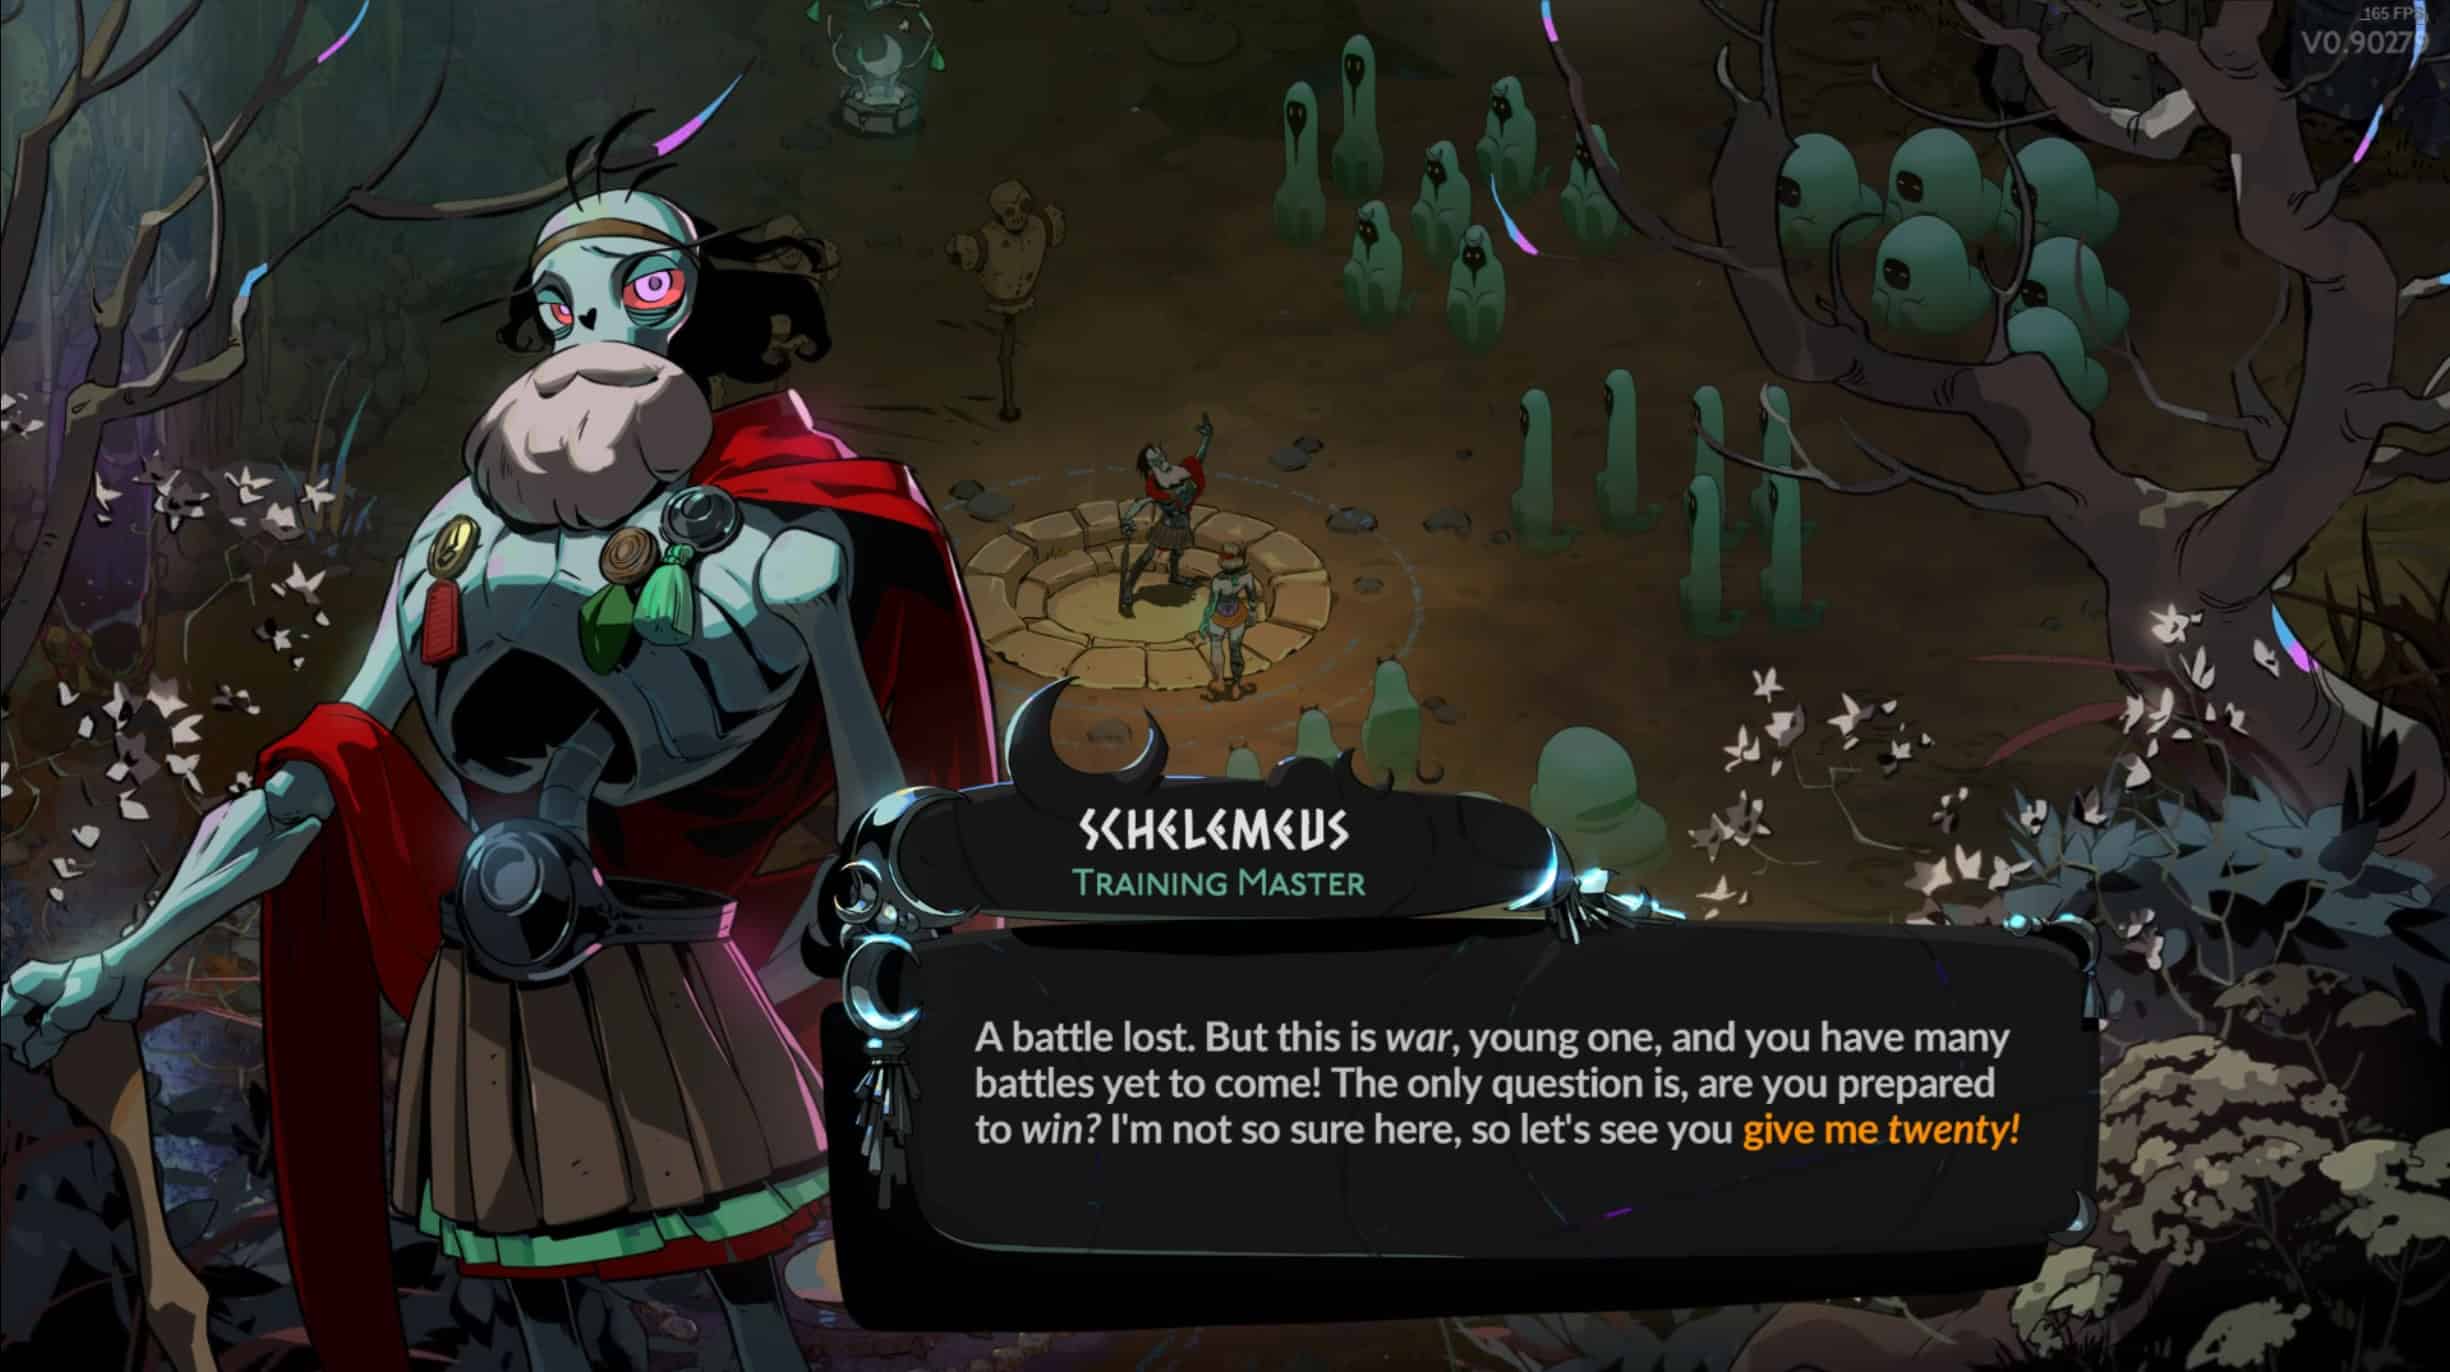 Hades 2 characters: A dialogue from Schelemeus in the game. Image captured by VideoGamer.